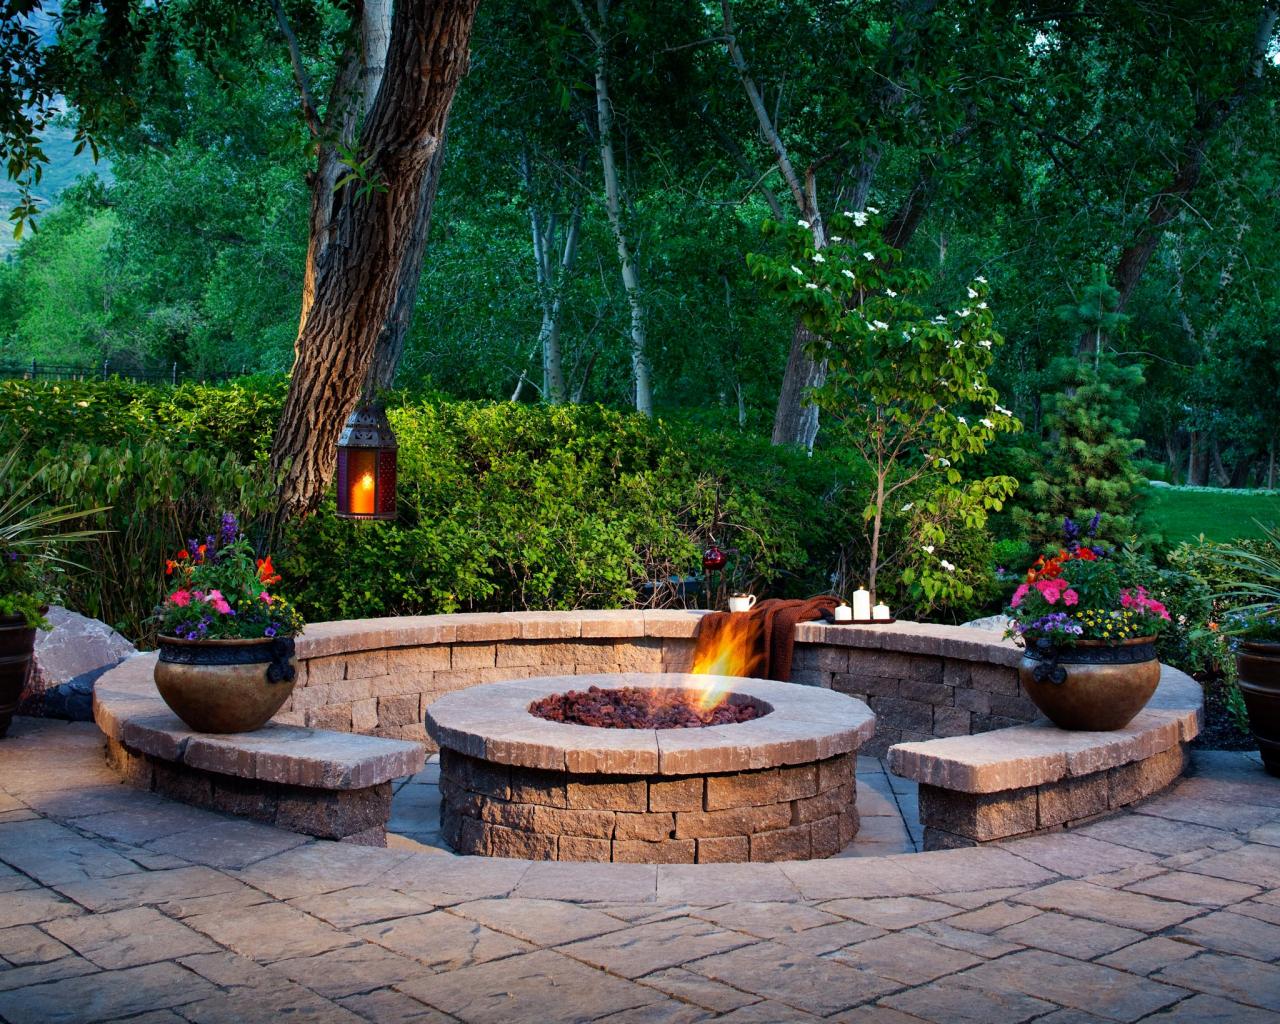 Designing A Patio Around Fire Pit Diy, Outdoor Seating Around Fire Pit